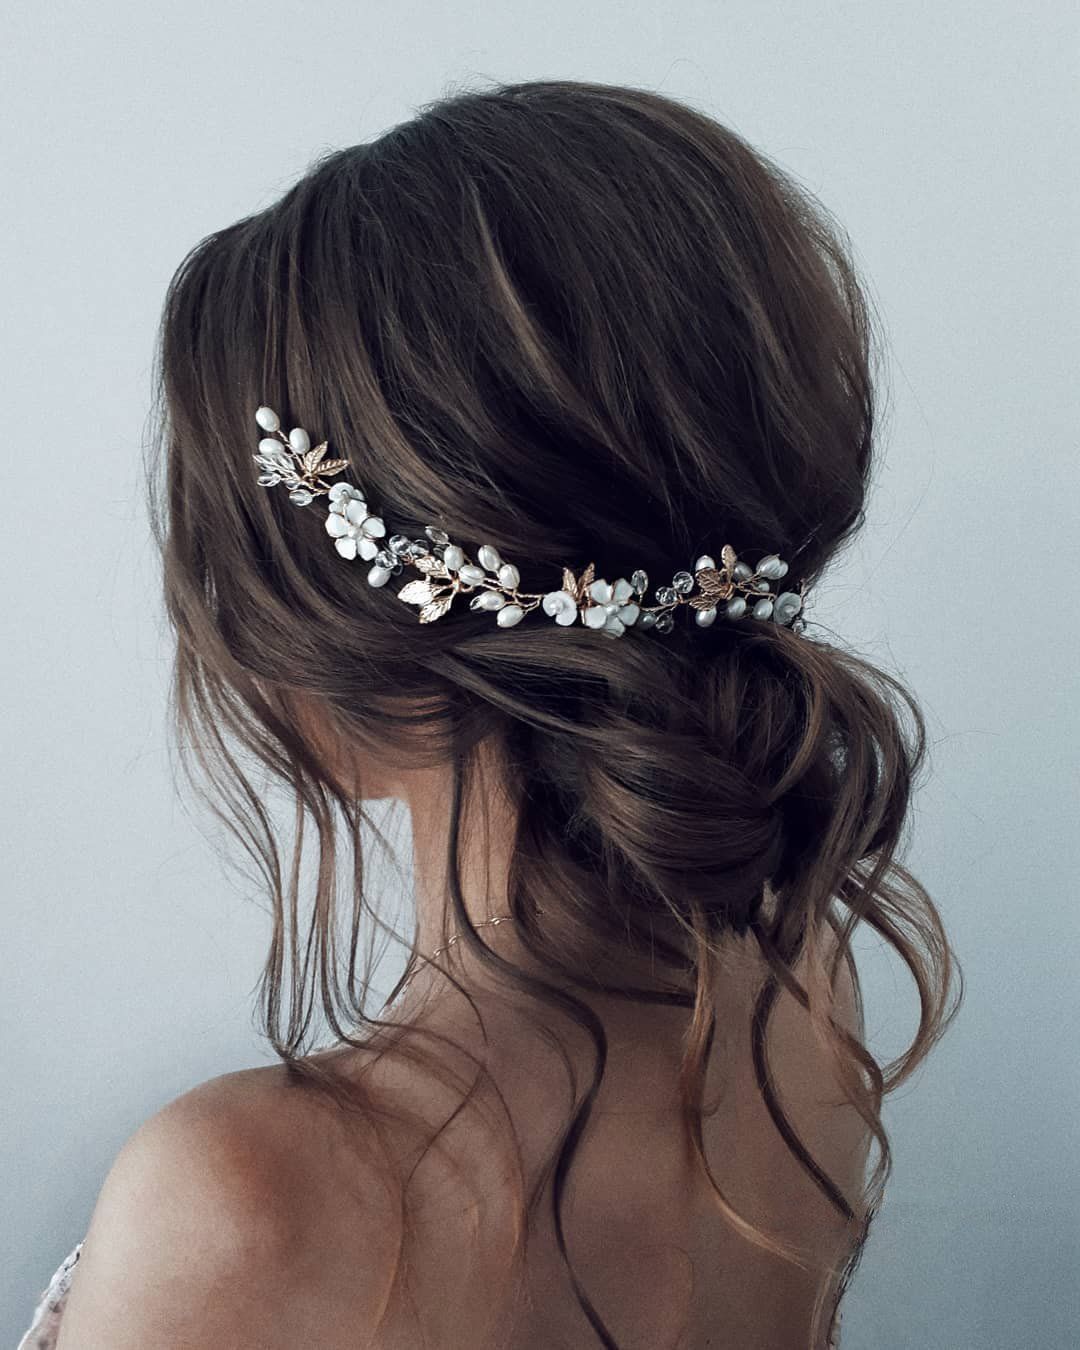 Stunning Wedding Hairstyles to Make You Shine on Your Big Day